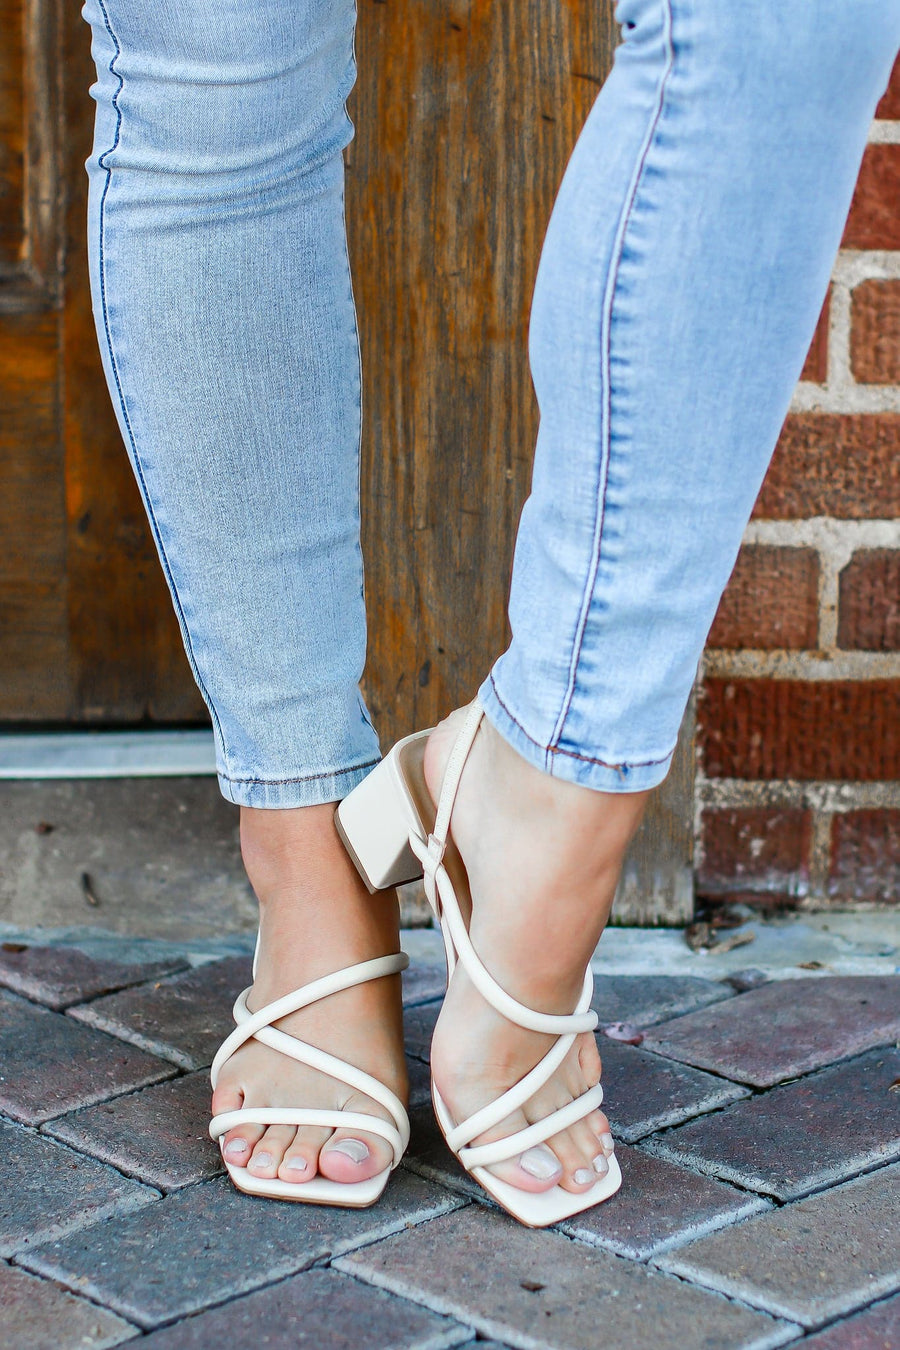 Bone / 5.5 Chic Happens Strappy Heels - FINAL SALE - Madison and Mallory